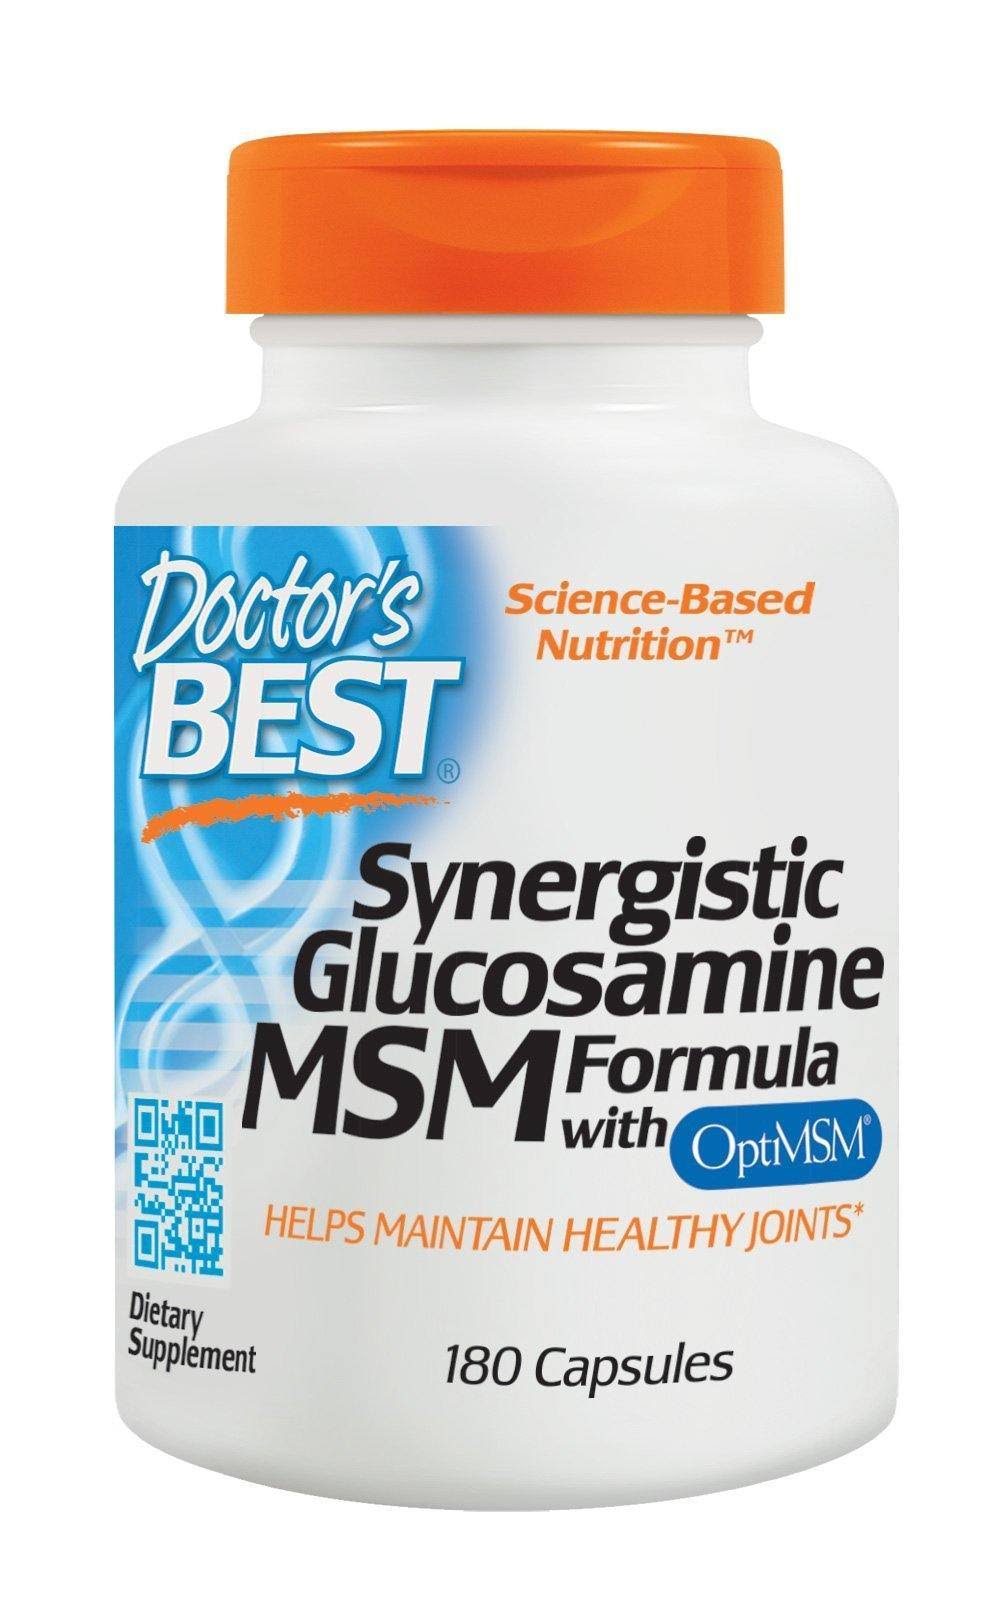 Doctor's Best Synergistic Glucosamine MSM Formula Supplement - 180 Capsules